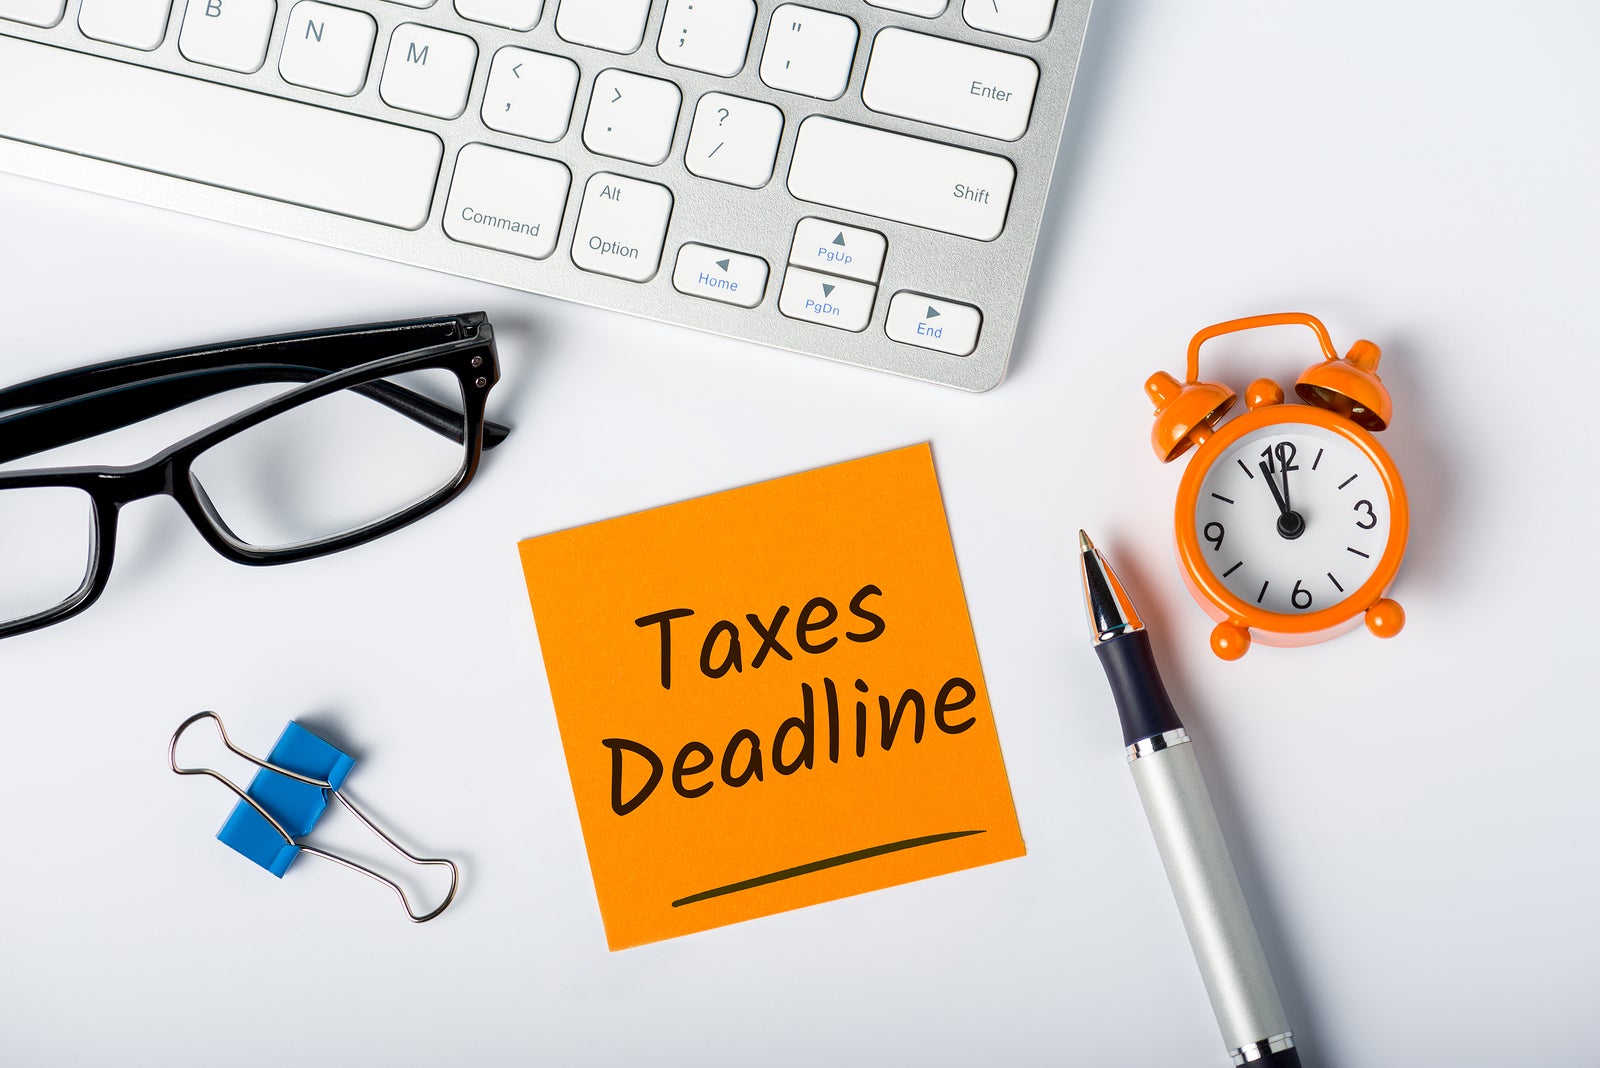 File or Extend: A Complete List of 2020 Tax Deadlines